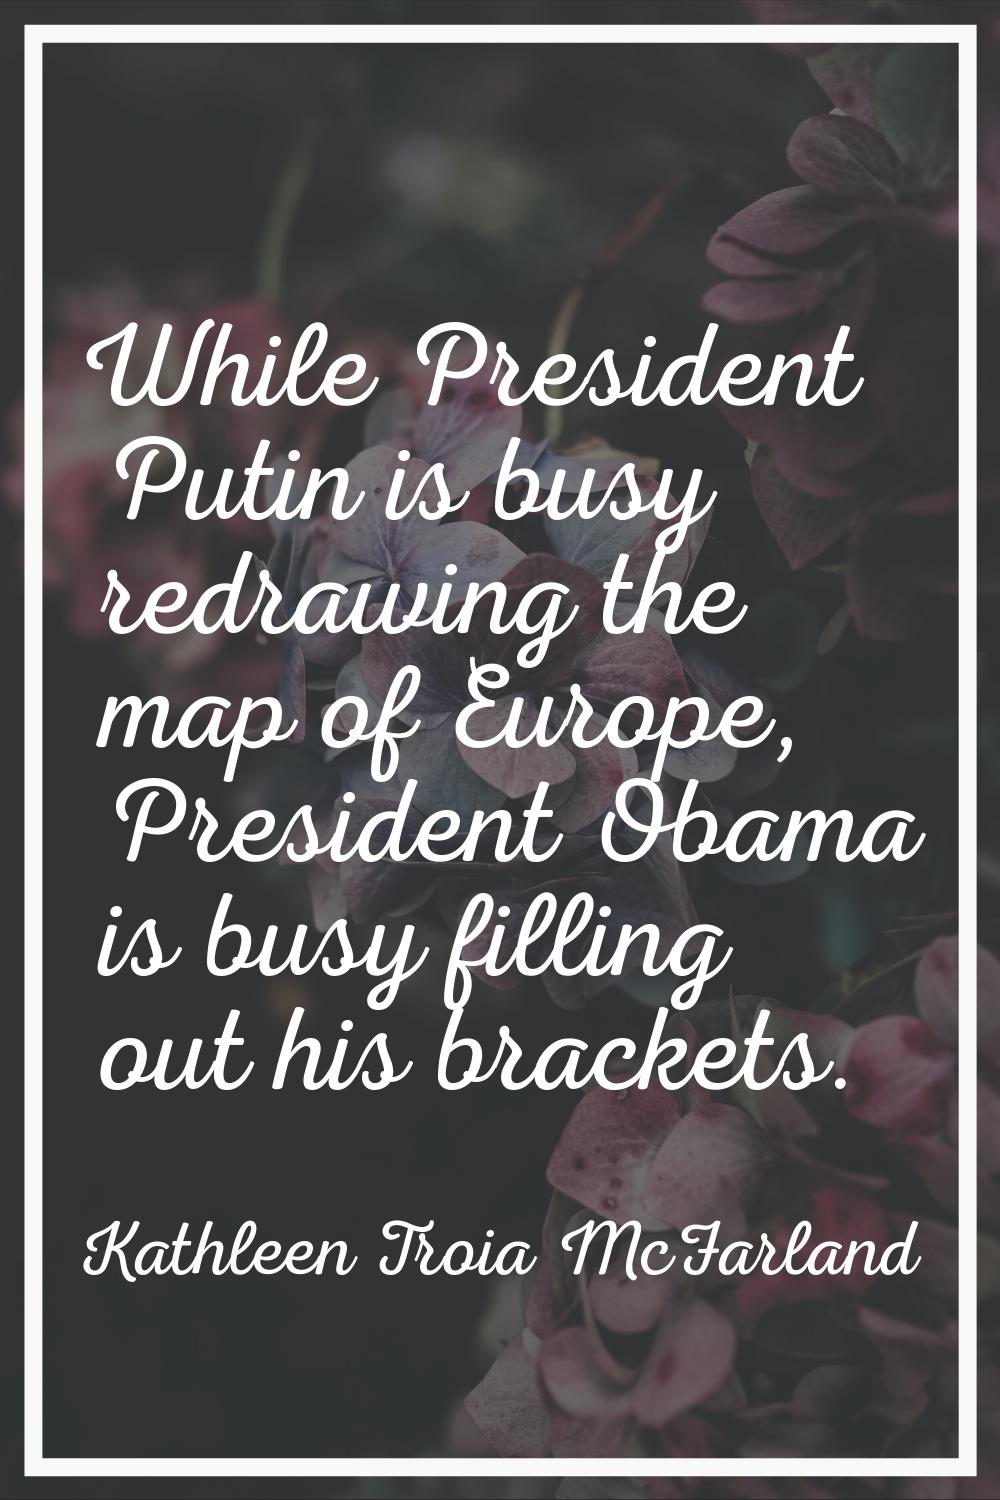 While President Putin is busy redrawing the map of Europe, President Obama is busy filling out his 